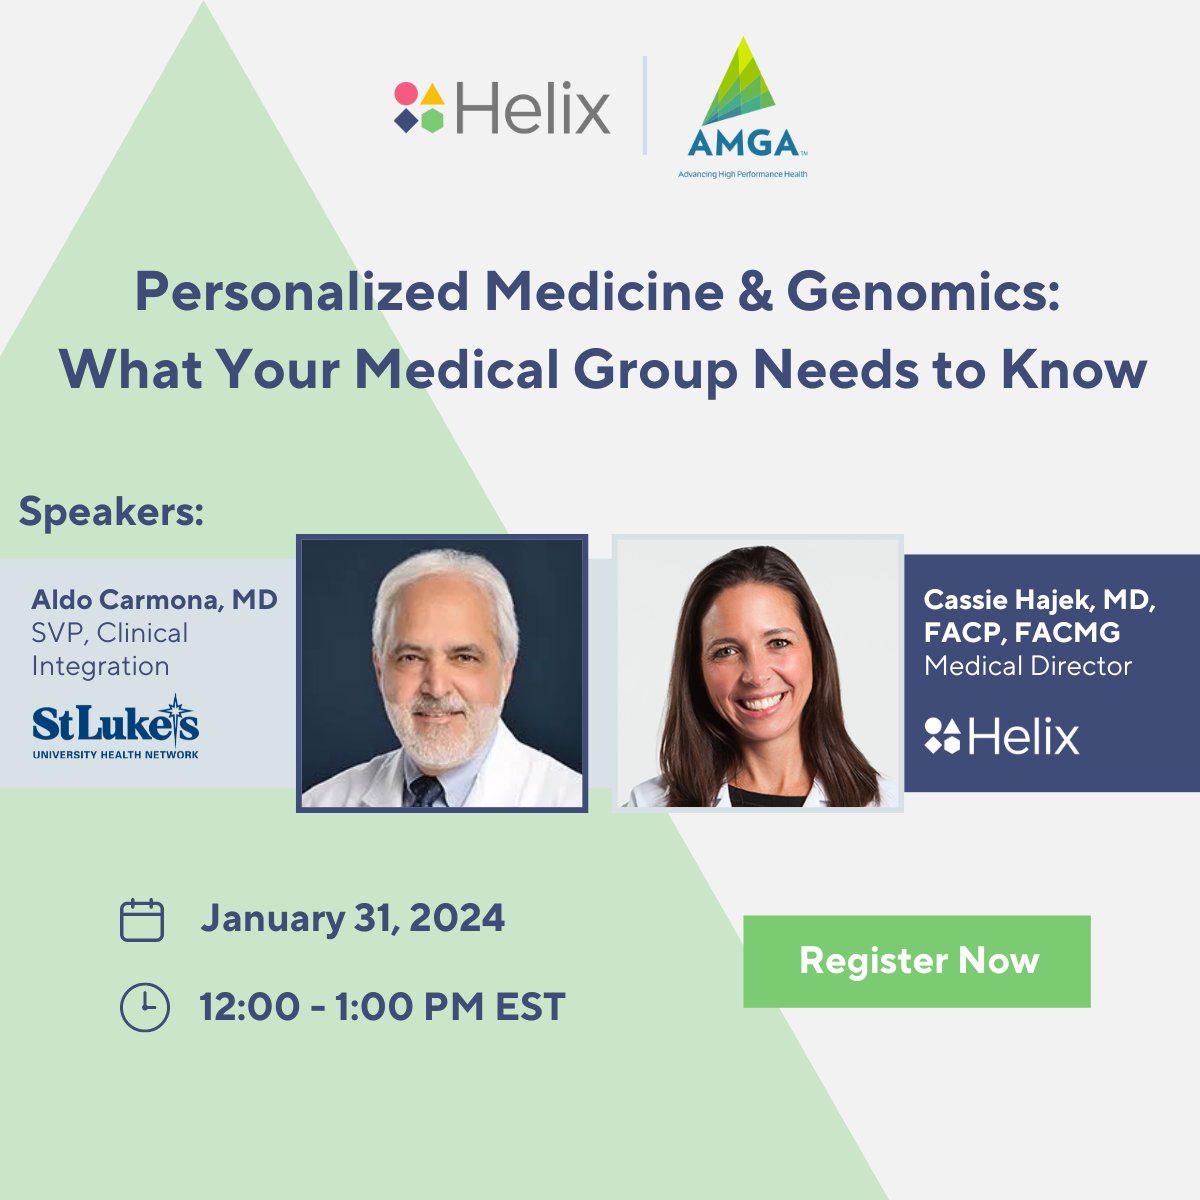 The future of genomics and personalized medicine is rapidly evolving. Join us for our upcoming webinar with Aldo Carmona and @cassiehajek to learn what your medical group needs to know to scale the use of genomics to deliver improved patient care. bit.ly/48XzApo